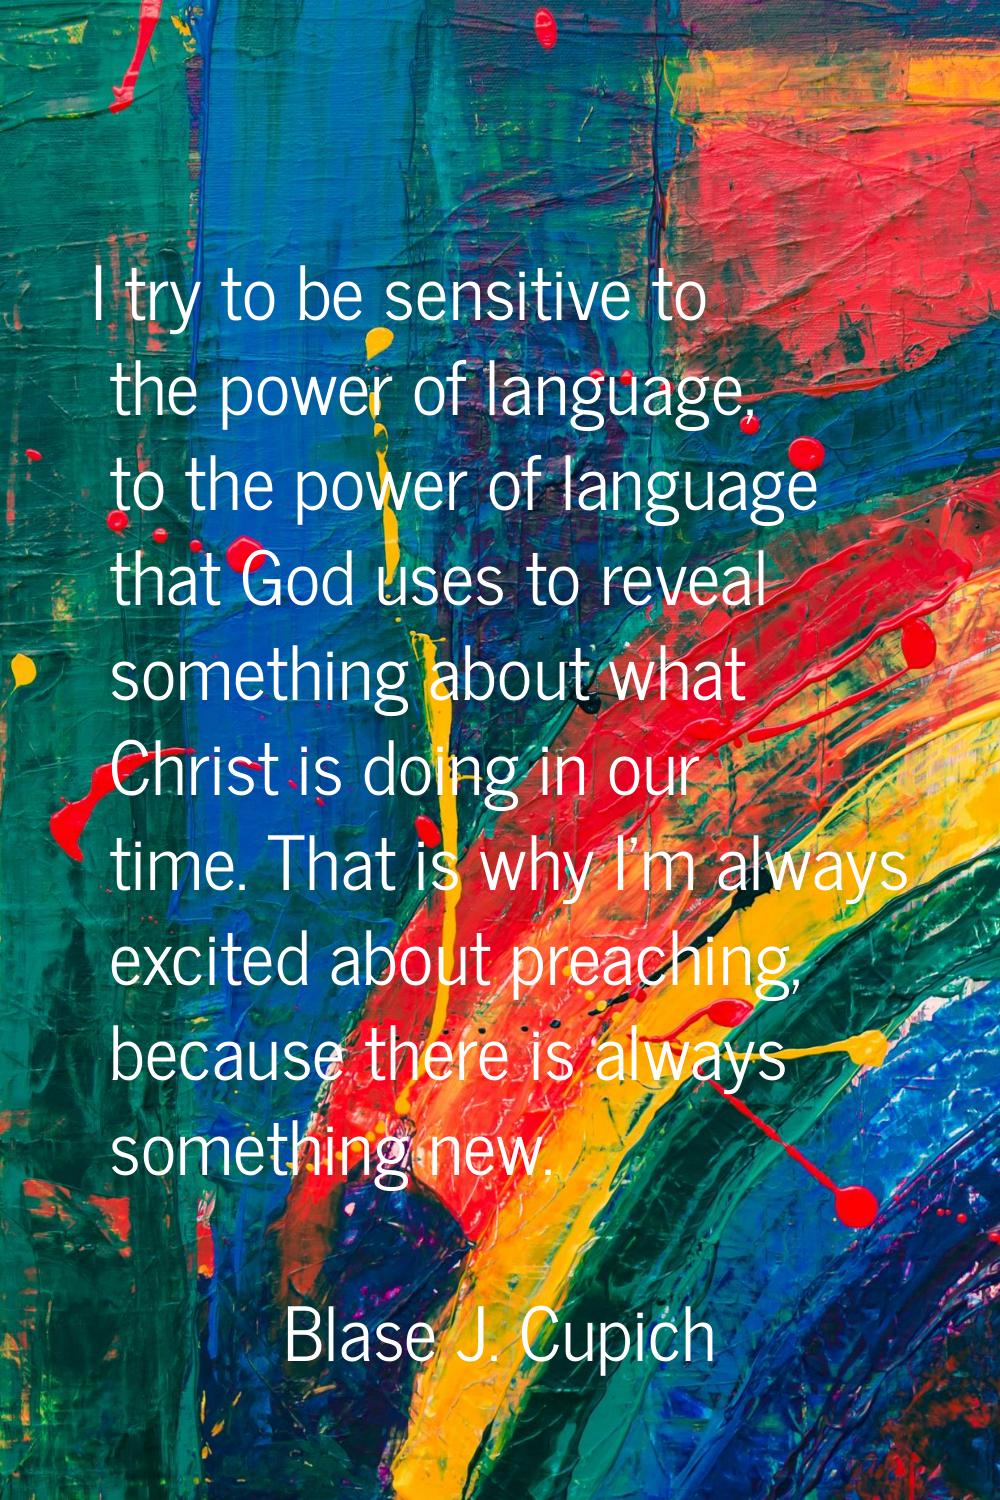 I try to be sensitive to the power of language, to the power of language that God uses to reveal so